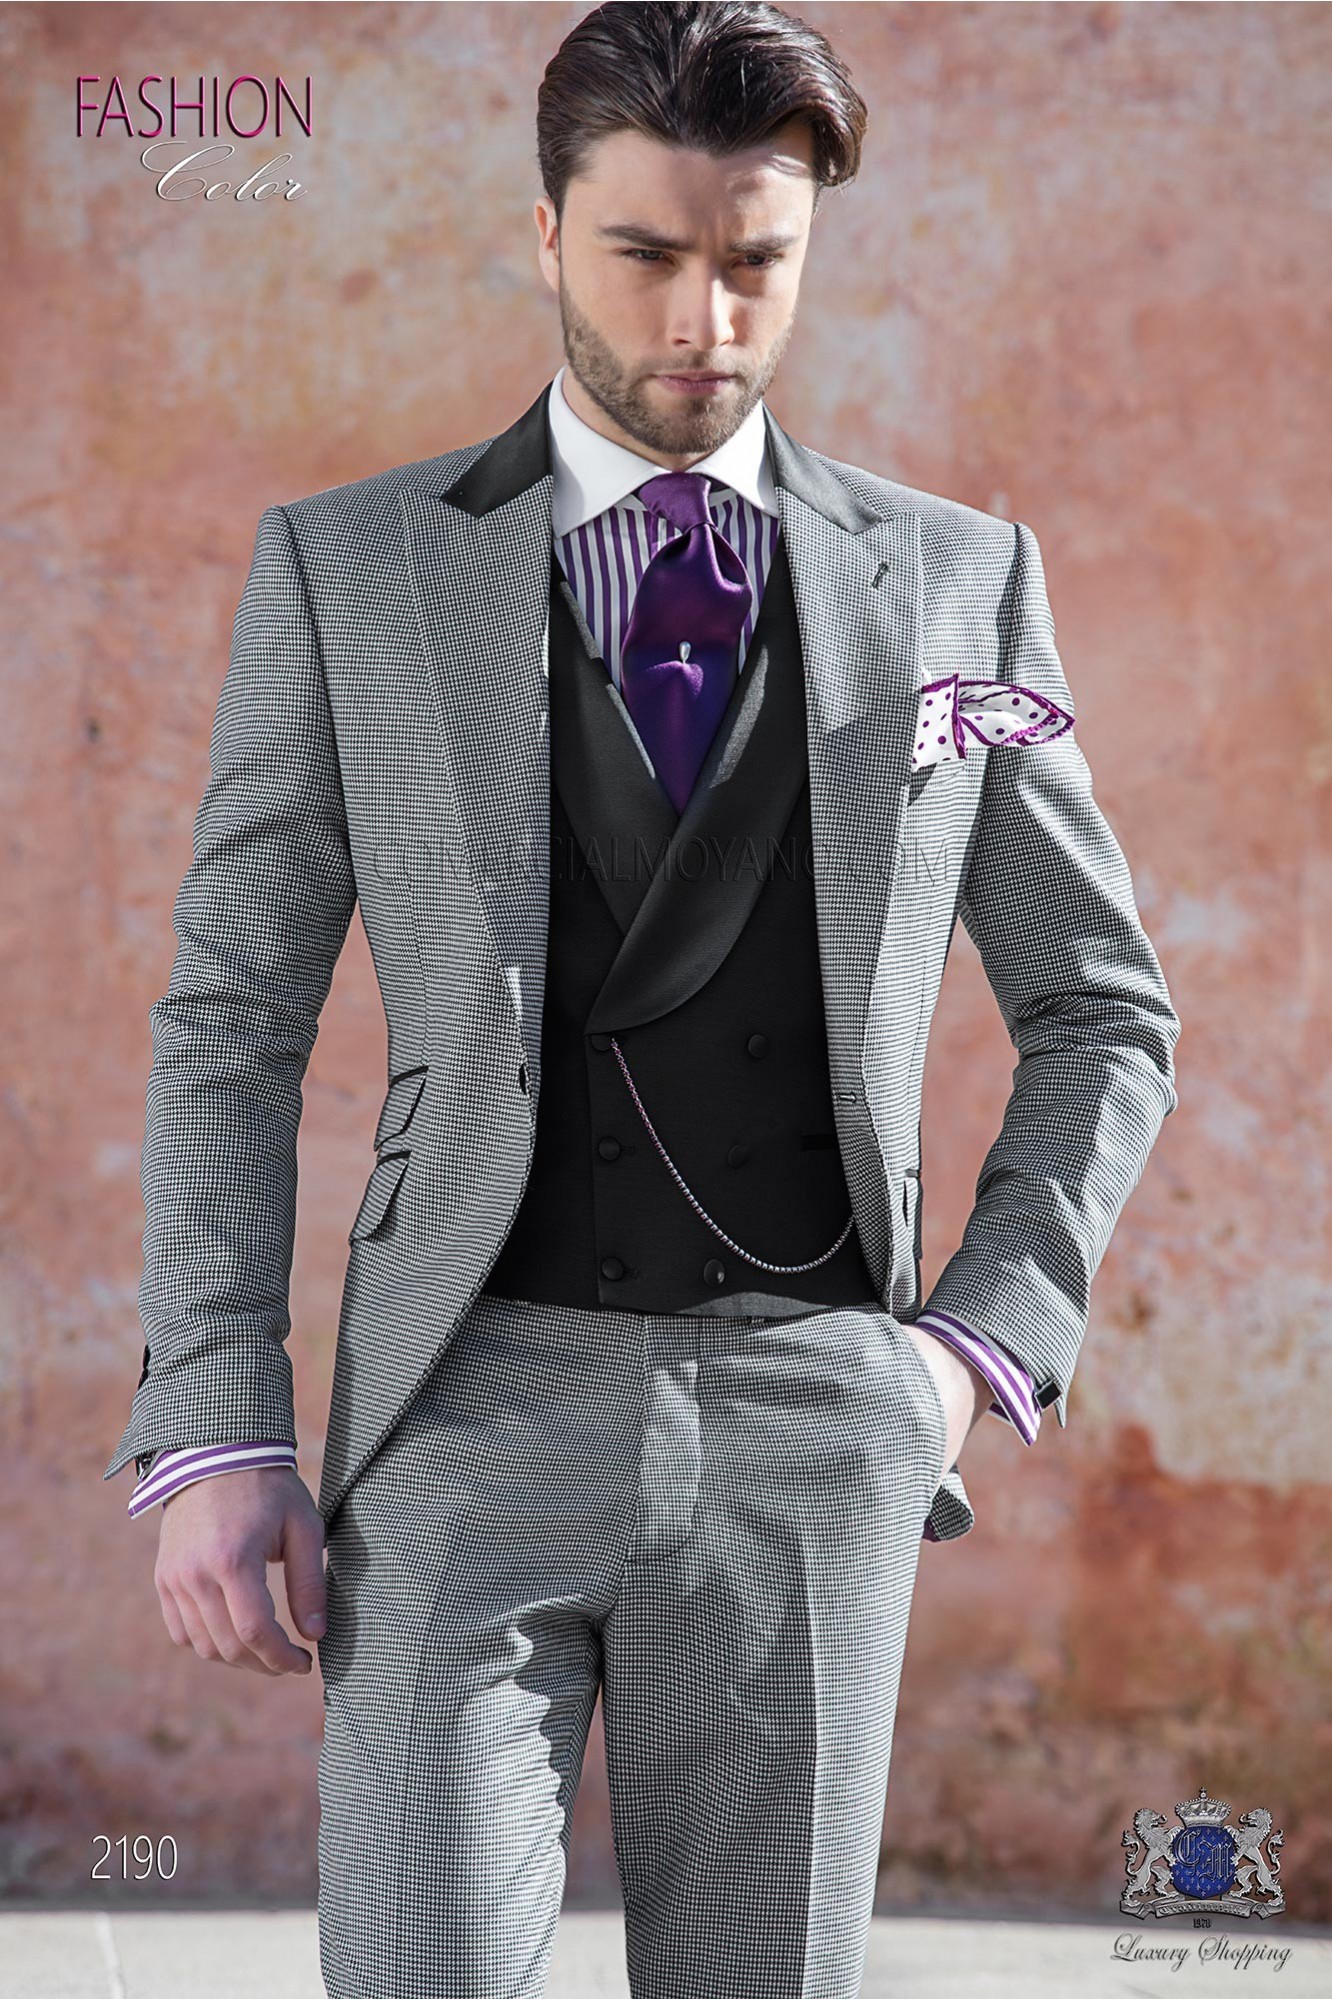 Fashion suit with modern cut 